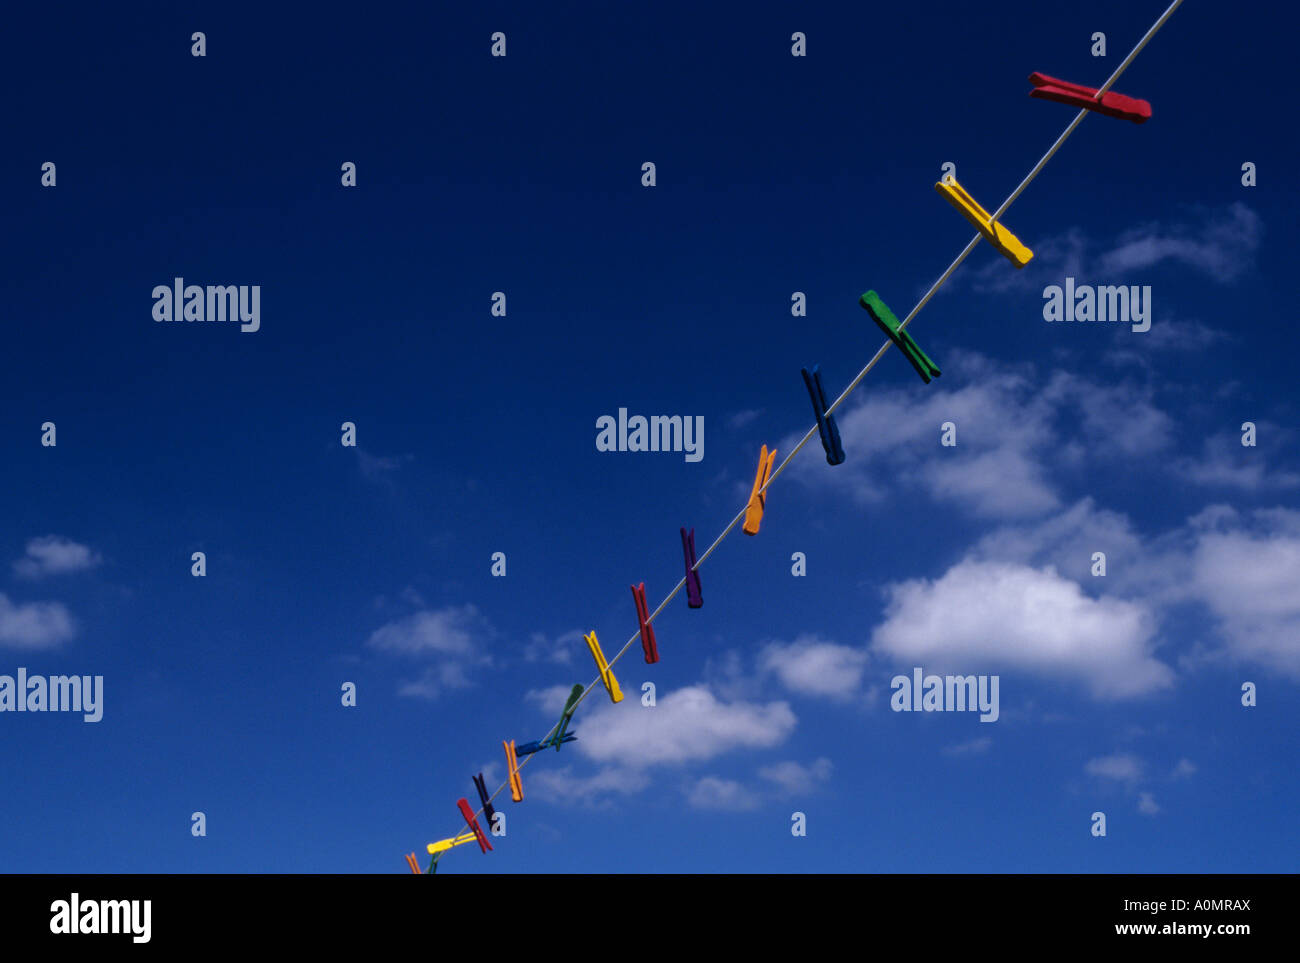 Multi colored clothespins hanging on a clothesline with white clouds and blue sky Stock Photo